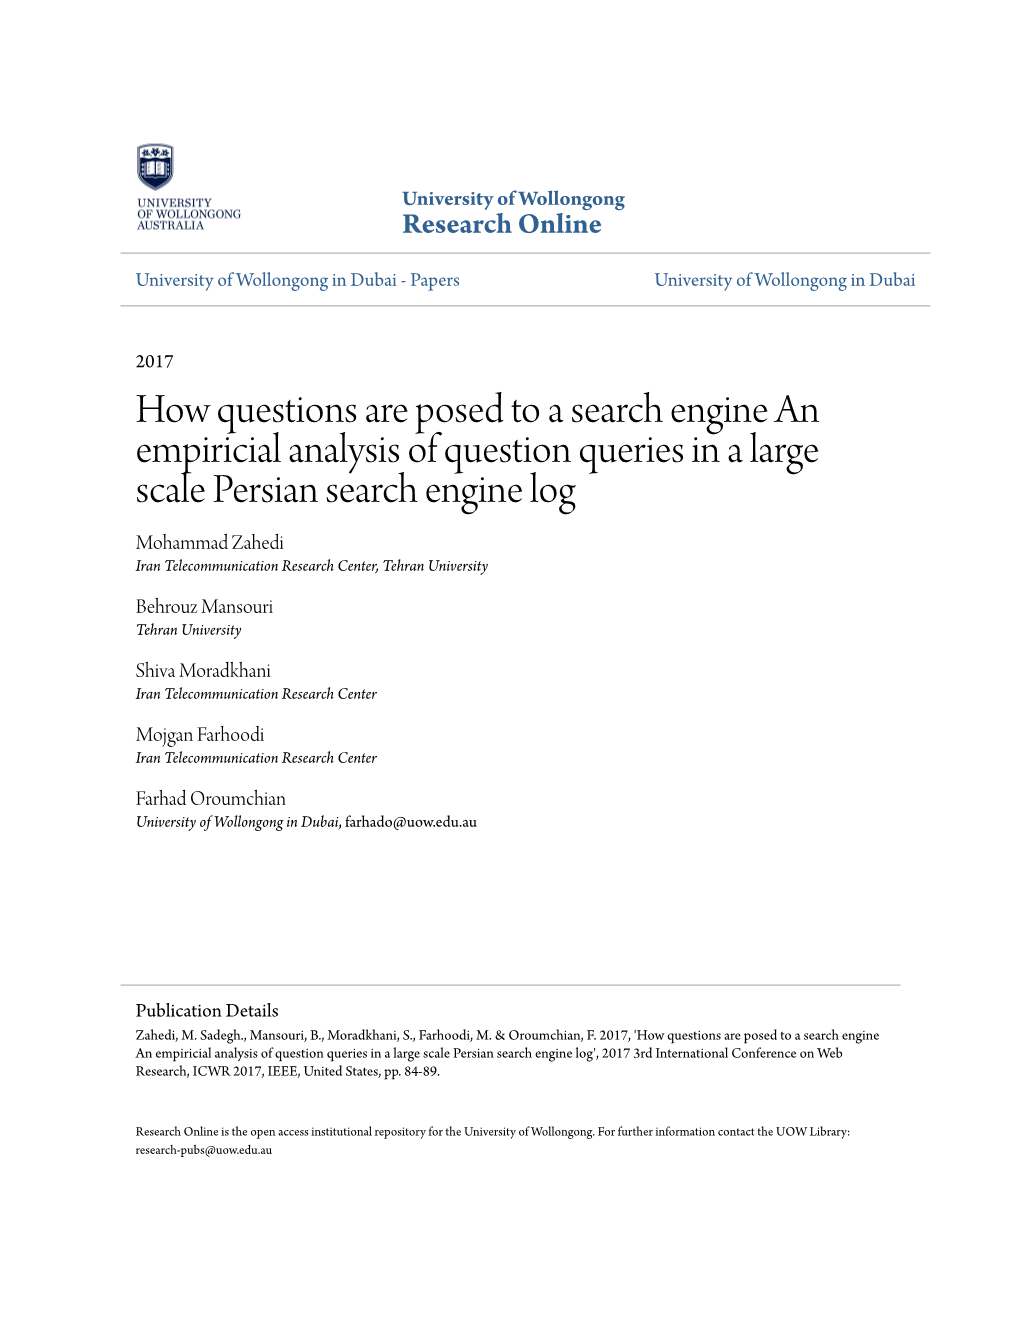 How Questions Are Posed to a Search Engine an Empiricial Analysis Of